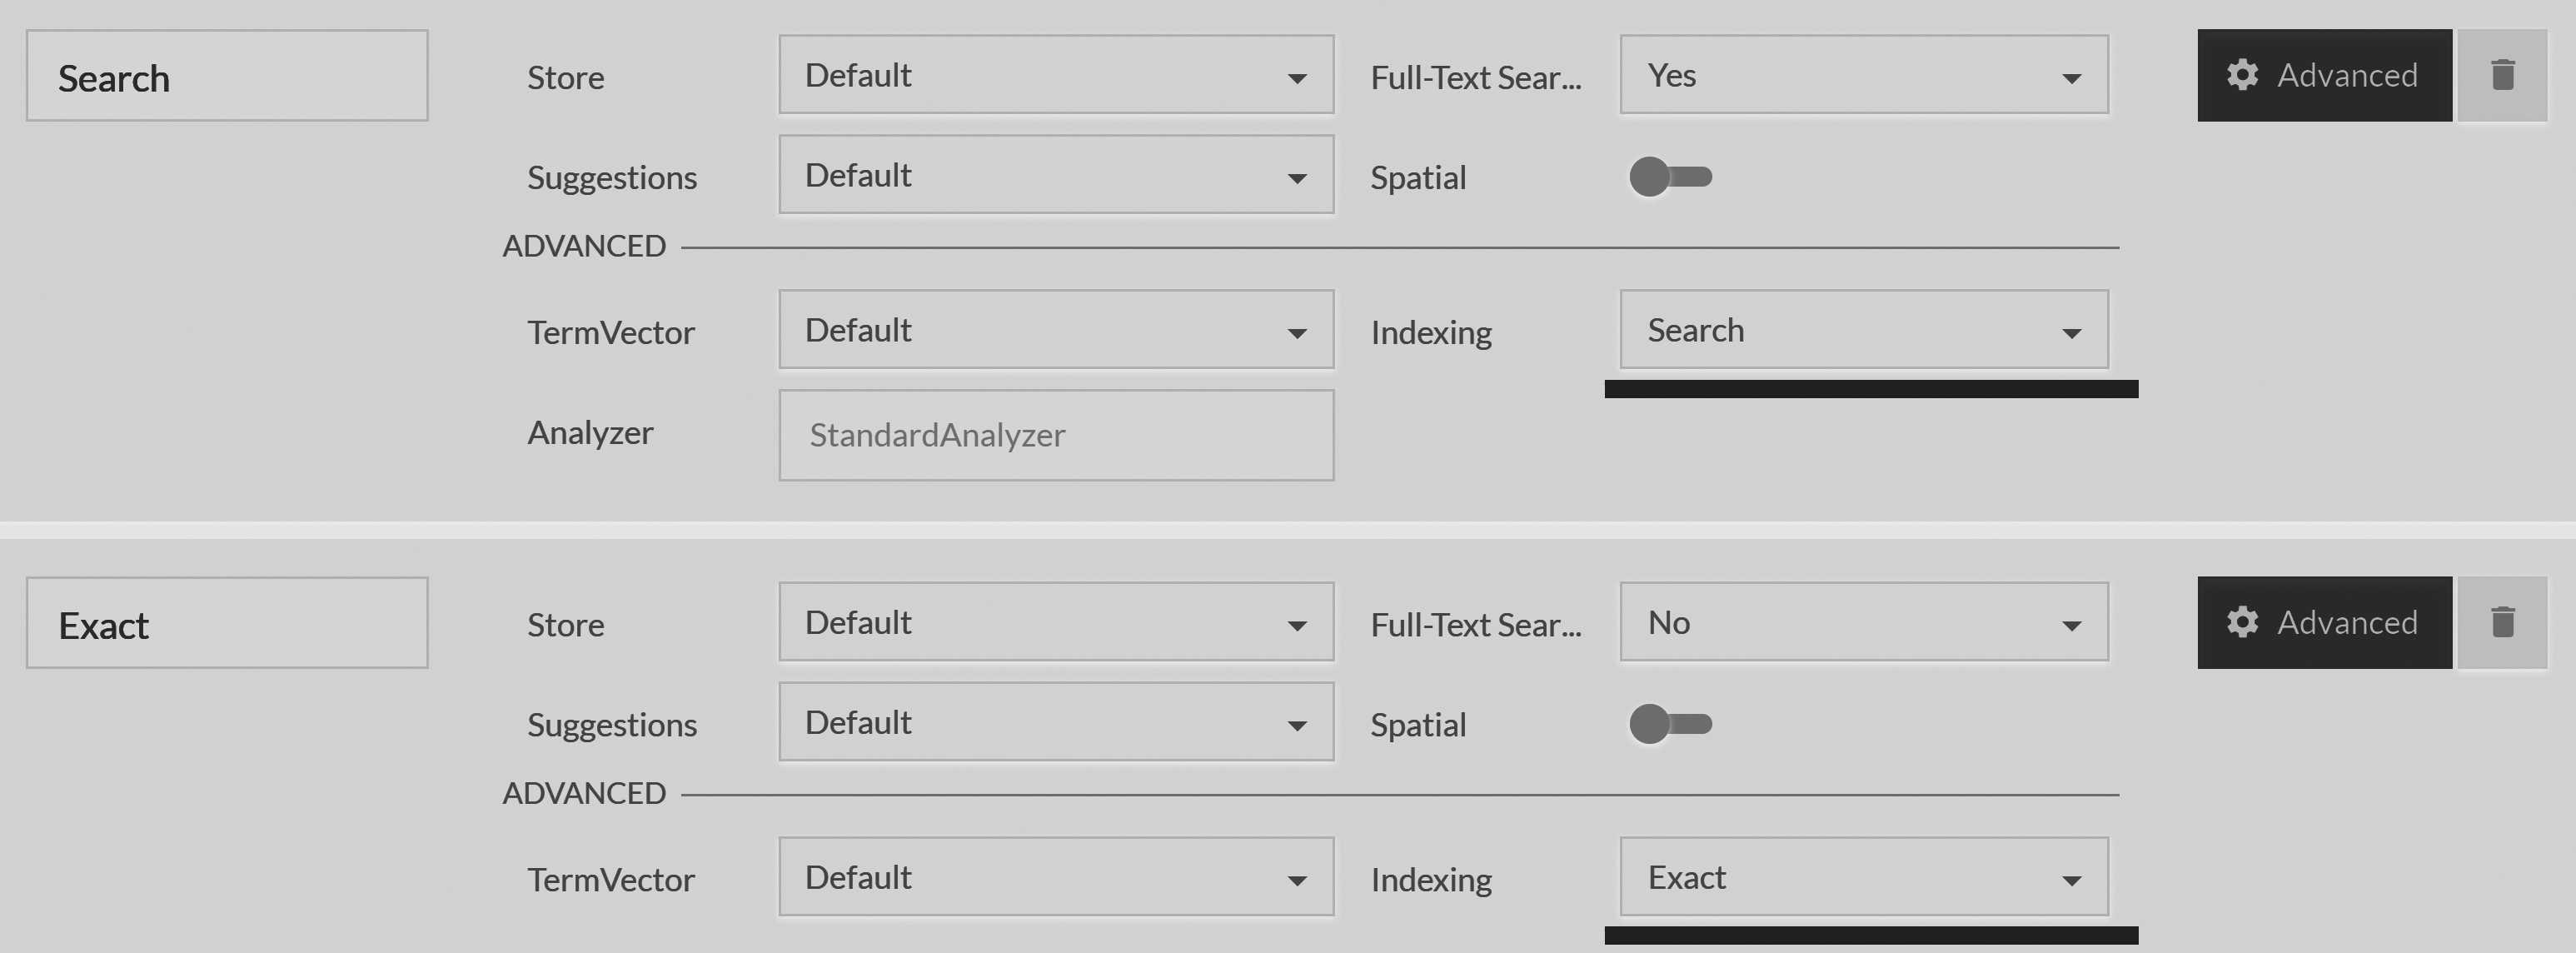 Configuring the test/search index fields with different analyzers